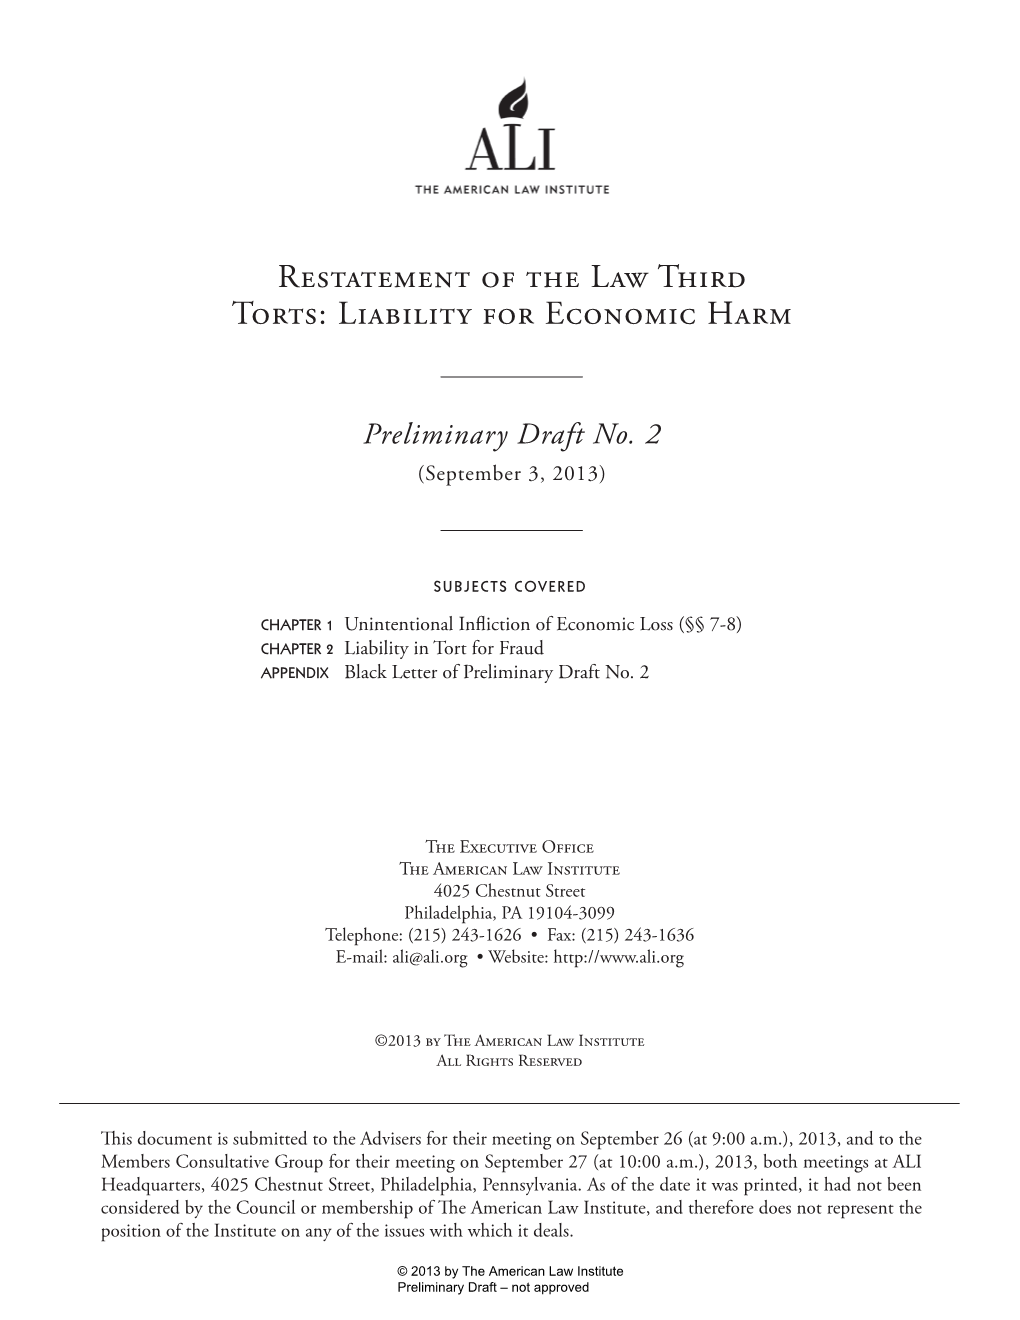 Restatement of the Law Third Torts: Liability for Economic Harm